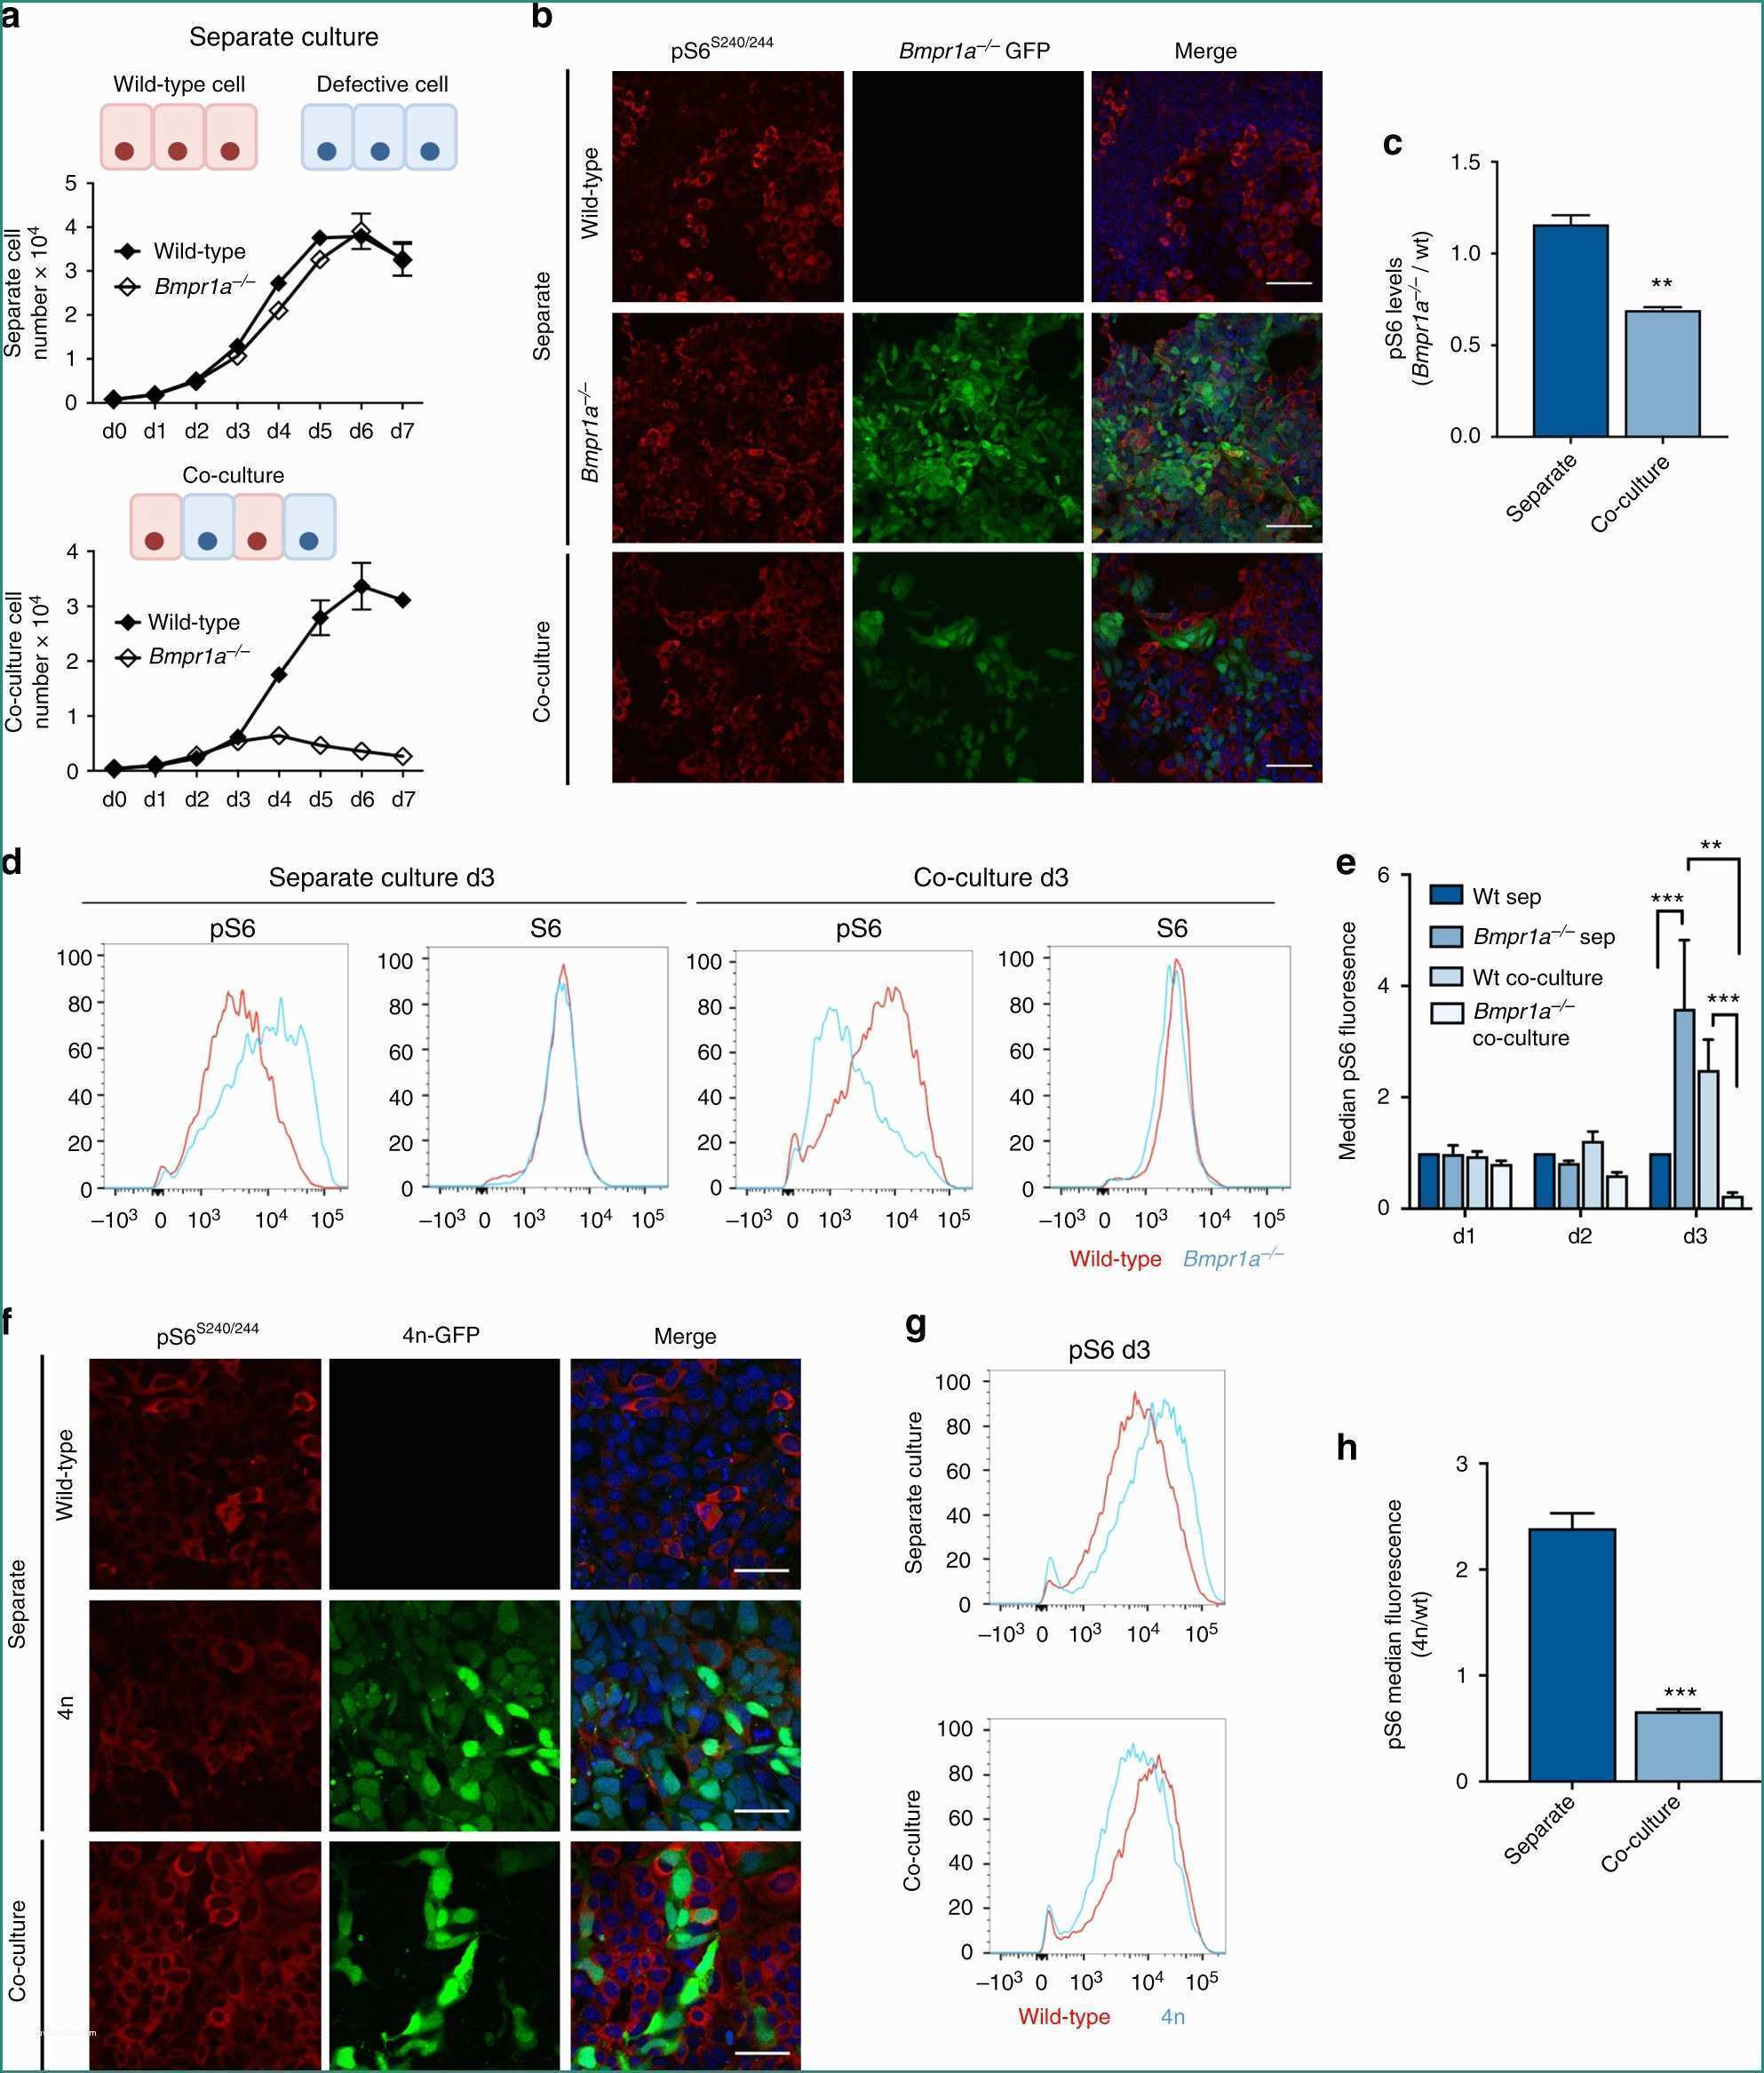 Ssml Gregorio Vii E P53 and Mtor Signalling Determine Fitness Selection Through Cell